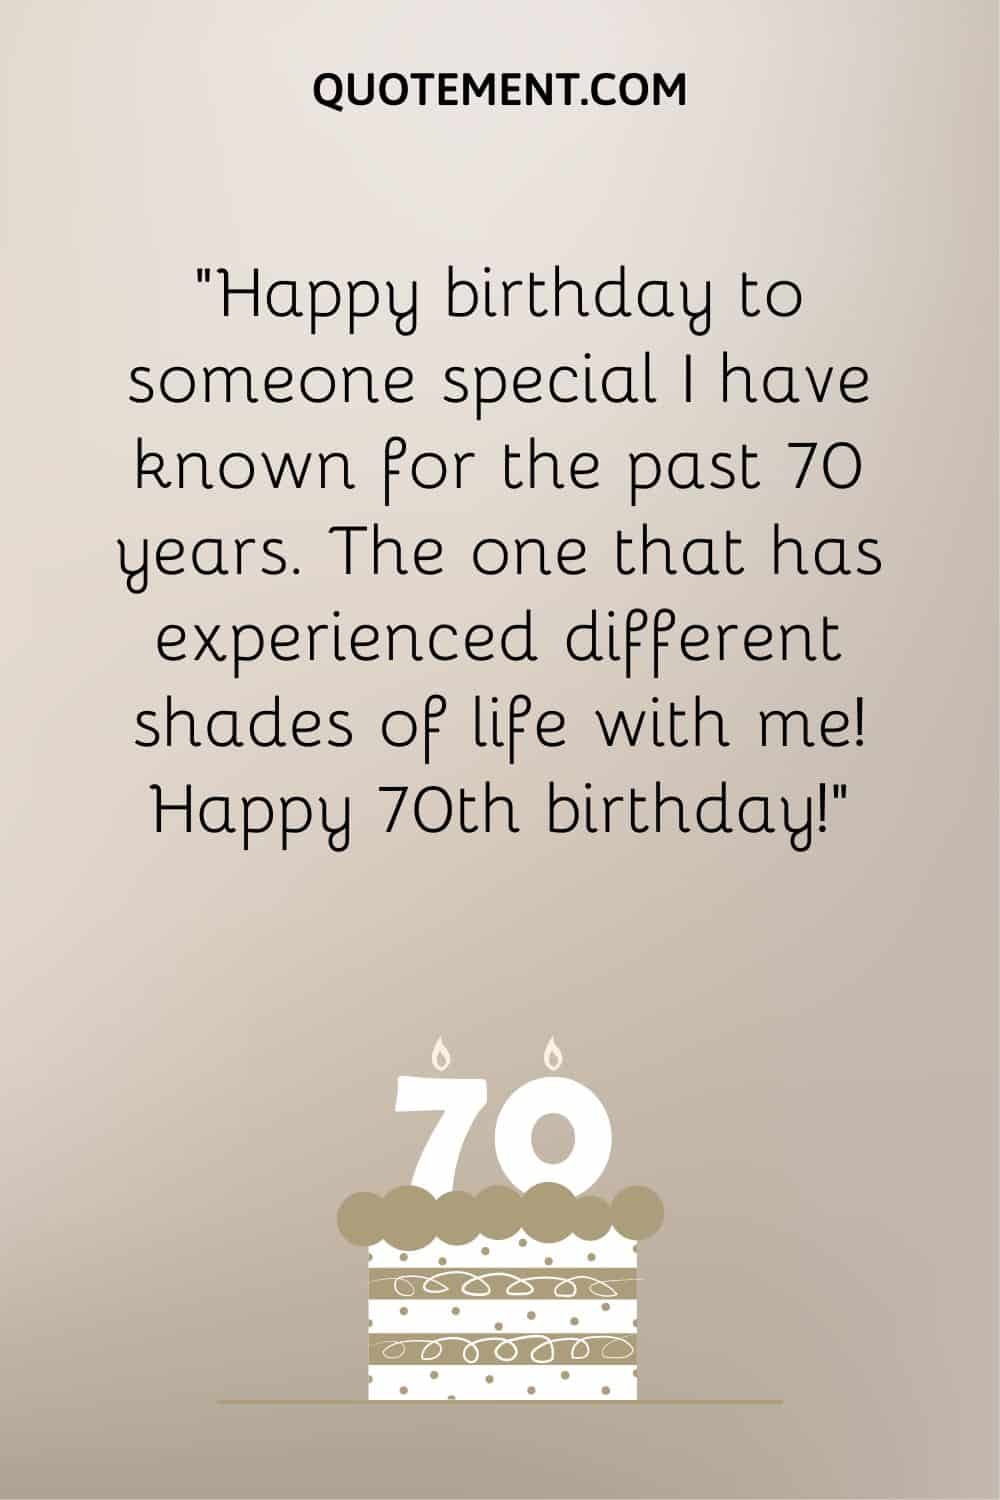 “Happy birthday to someone special I have known for the past 70 years. The one that has experienced different shades of life with me! Happy 70th birthday!”